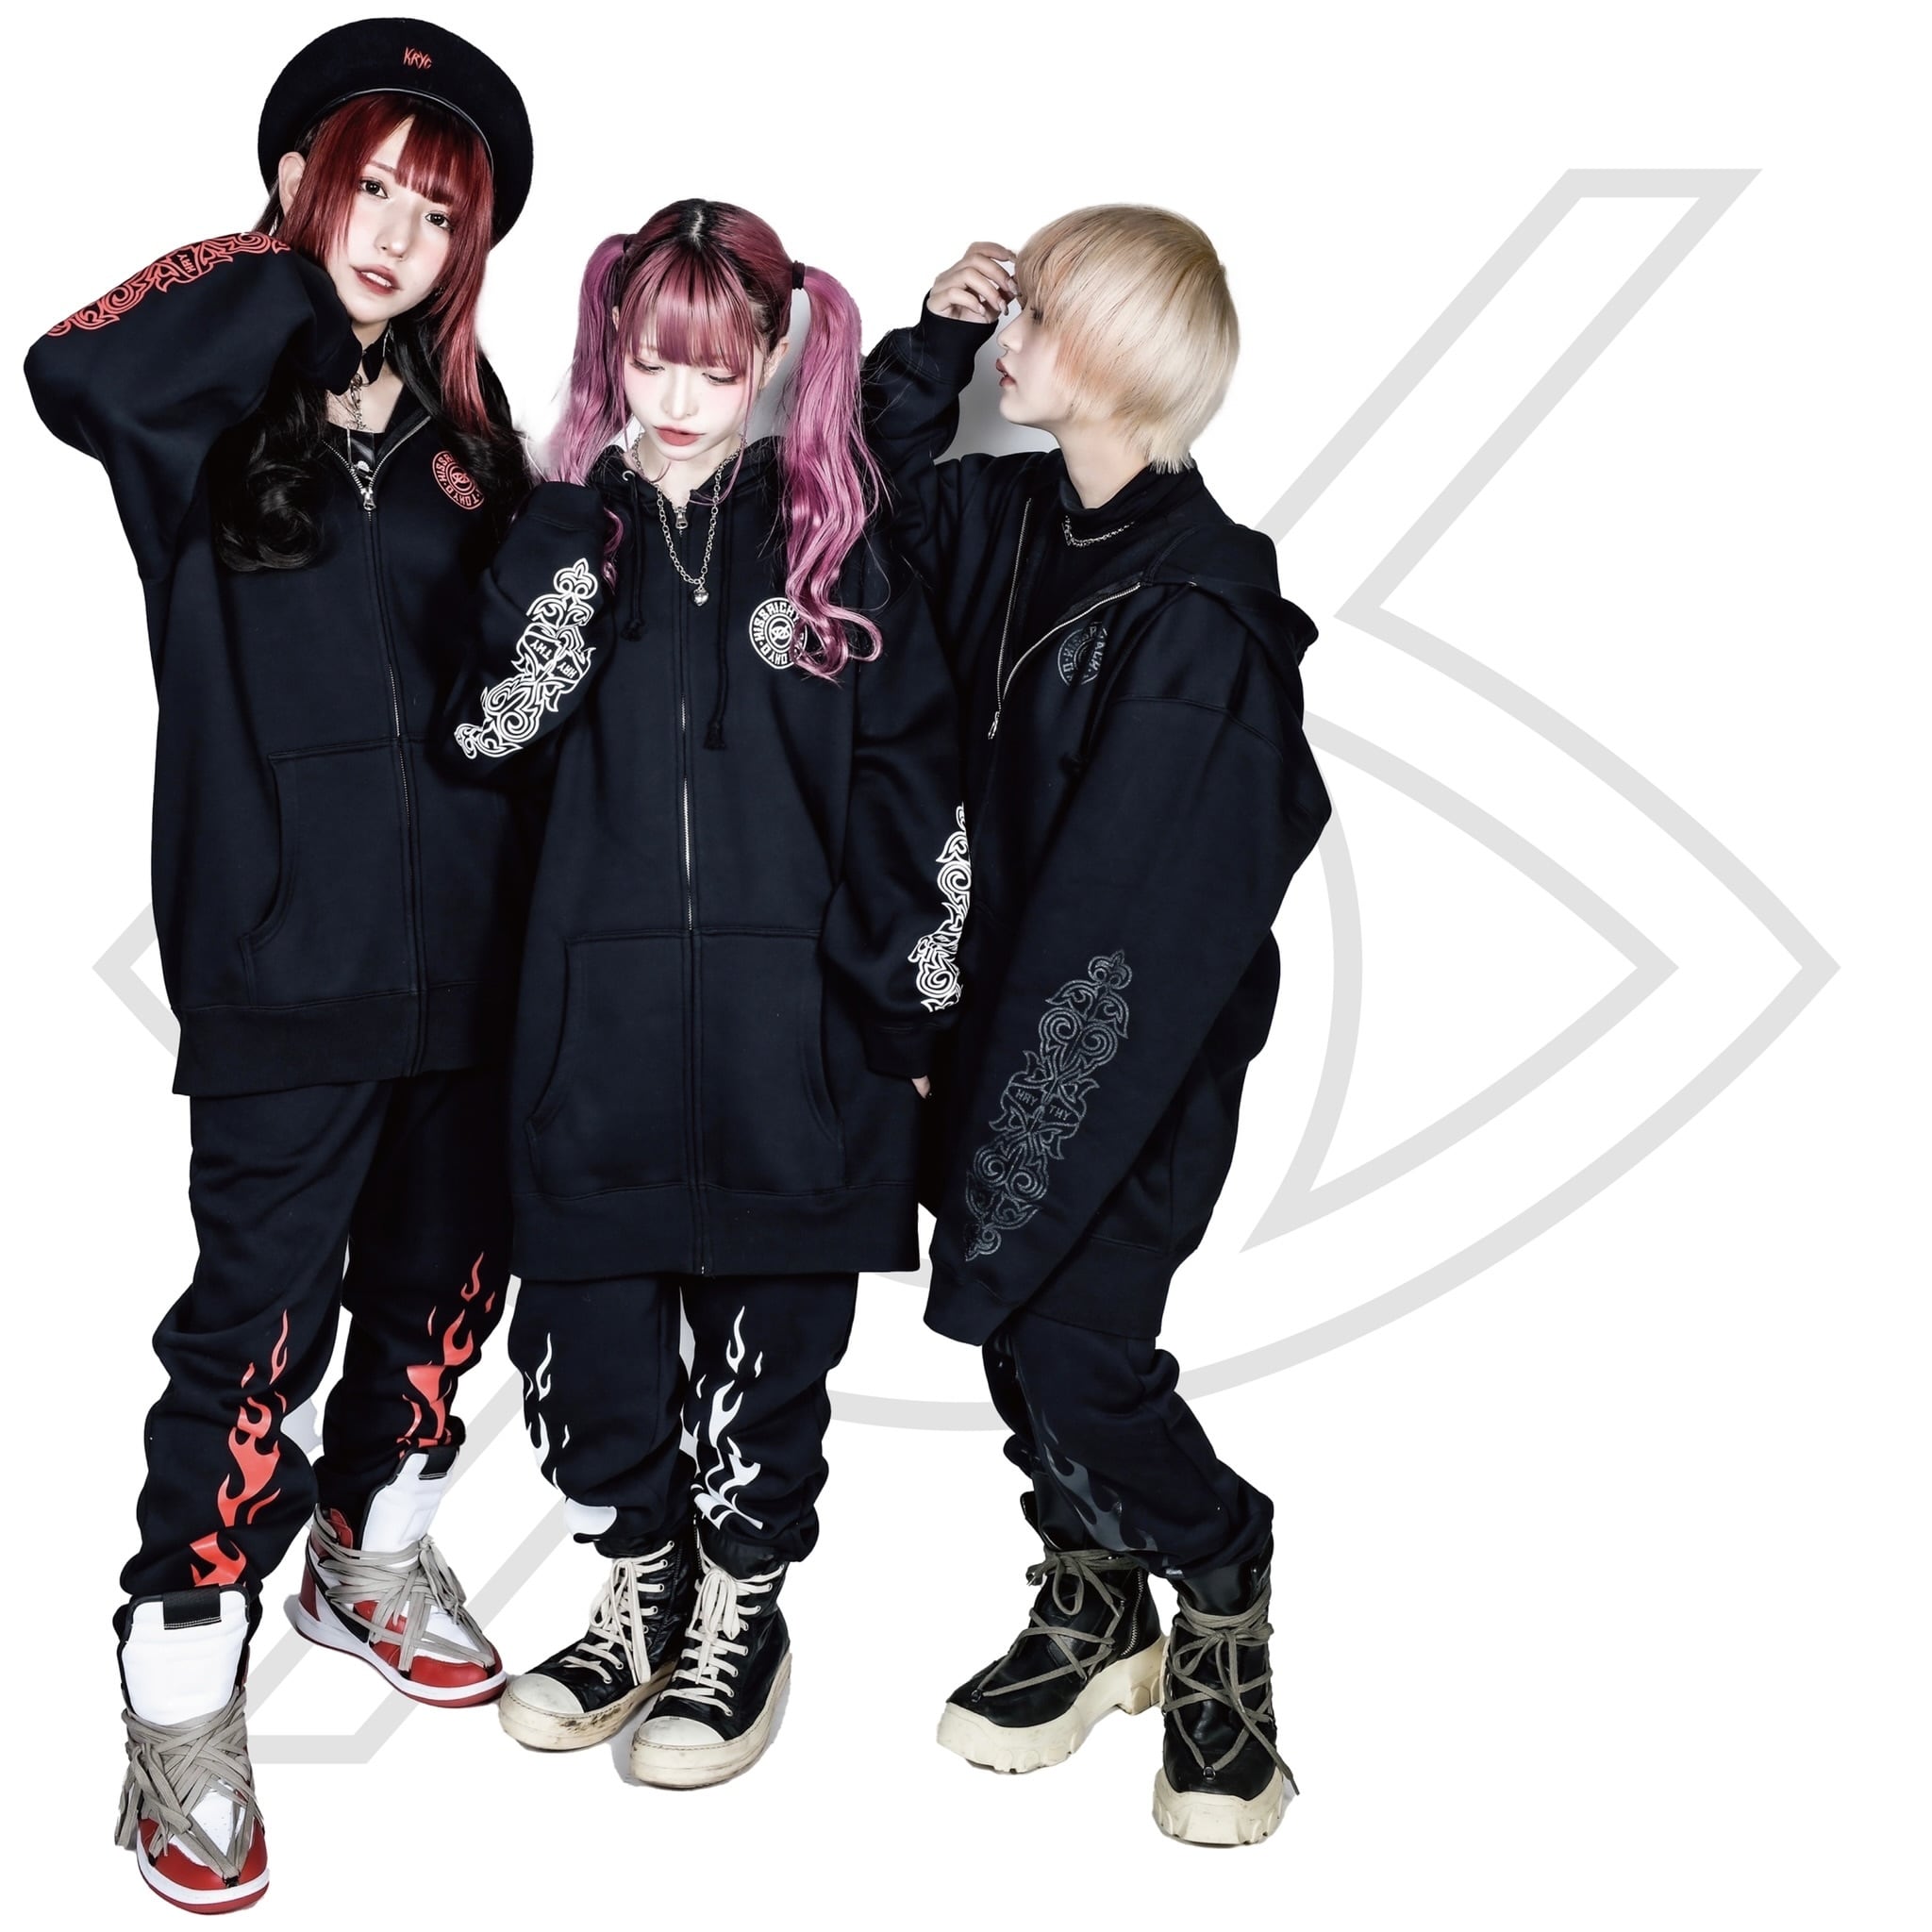 「HELLOKRY」 | KRY clothing powered by BASE